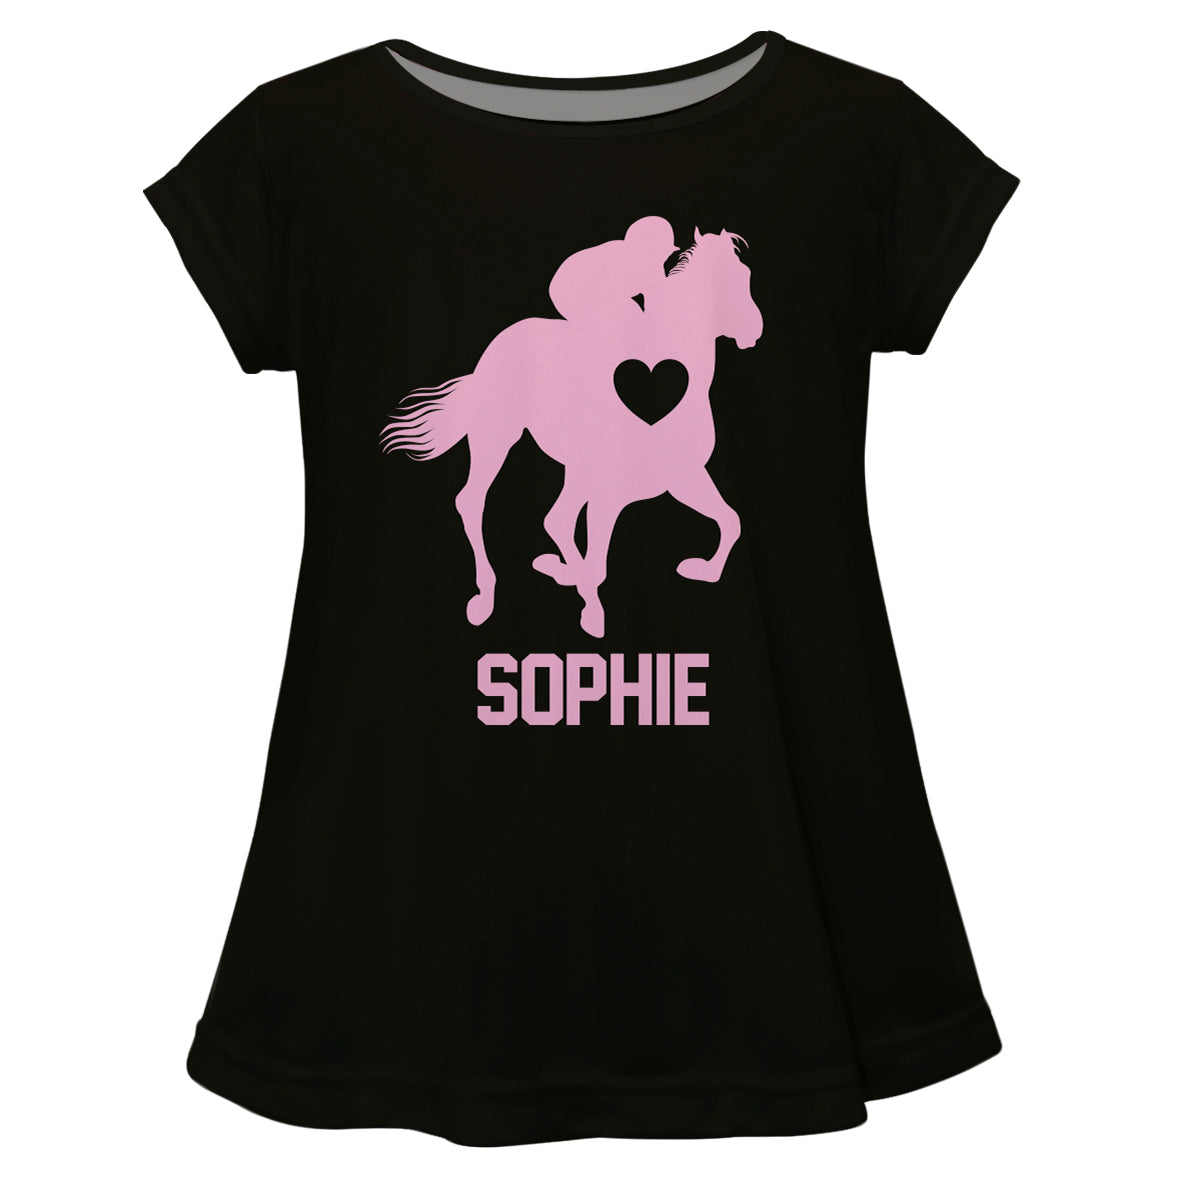 Cowgirl and Personalized Name Black Short Sleeve Laurie Top - Wimziy&Co.